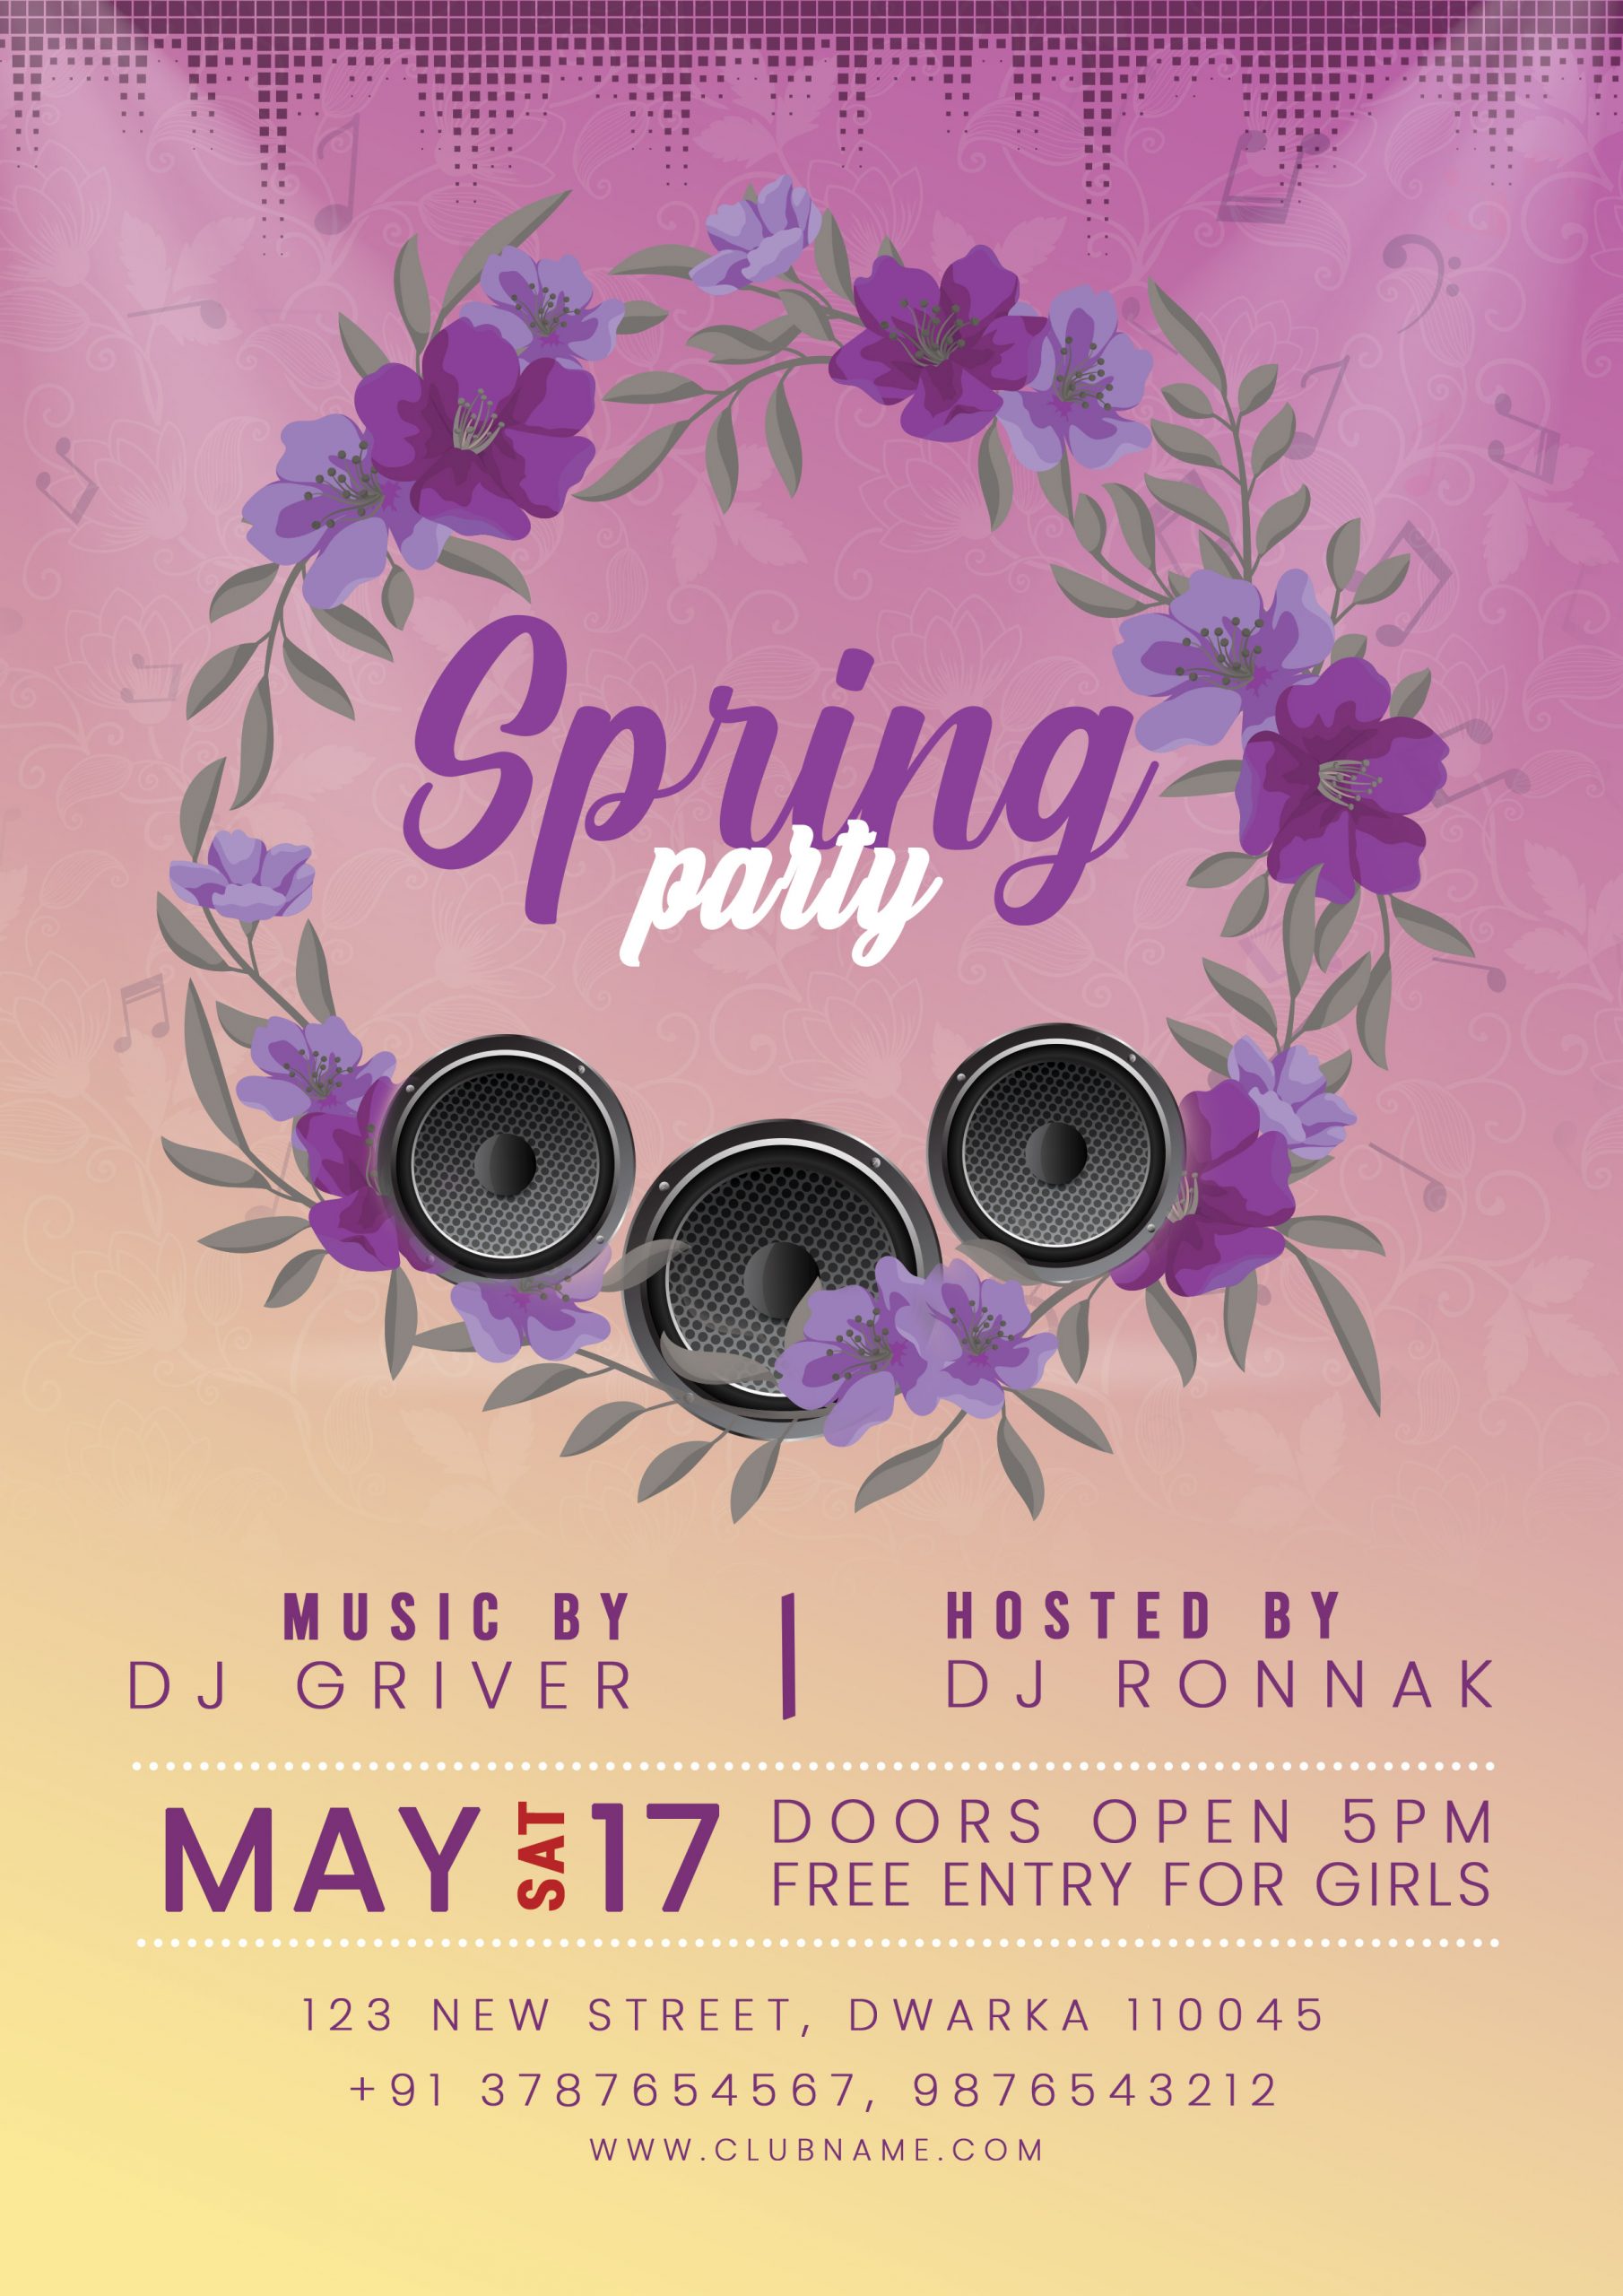 spring party, spring day party, spring, free spring examples, poster ideas, club party flyers, poster my wall, spring flyer, spring background, spring poster, printable, free psd, creative design, mockup, party, psd, spring party social media, hello spring, banner, flowers, free design,partywear, fashionmurah,den pasar, partyhard, partying, partynight, partylife, partybus,partyplanner, party flyer app party flyer background design, party flyer maker app,free party flyer maker app ,party flyer ideas ,birthday party flyer templates ,free party flyer templates psd ,free party flyer templates for microsoft word,party plural ,party's or parties ,party synonym ,party thesaurus ,party meaning in hindi, birthday party ,partys, flyers templates ,flyers design,free flyer design templates ,flyer size ,flyer maker app ,free printable flyer maker online, flyer design ideas ,flyer design templates free download,the print website,print online ,vista print ,the print news ,printvenue ,online printing india ,printland ,the print wiki, cheapest flyer printing online ,pamphlet printing cost in hyderabad ,flyer printing cost ,black and white pamphlet printing ,flyer printing near me ,pamphlet printing cost in pune ,print pamphlets online free ,a4 flyer printing cheap, party flyer maker app ,free party flyer templates psd ,party flyer app ,free party flyer maker app ,party flyer ideas ,free party flyer templates for microsoft word ,free flyer templates ,free party templatesn